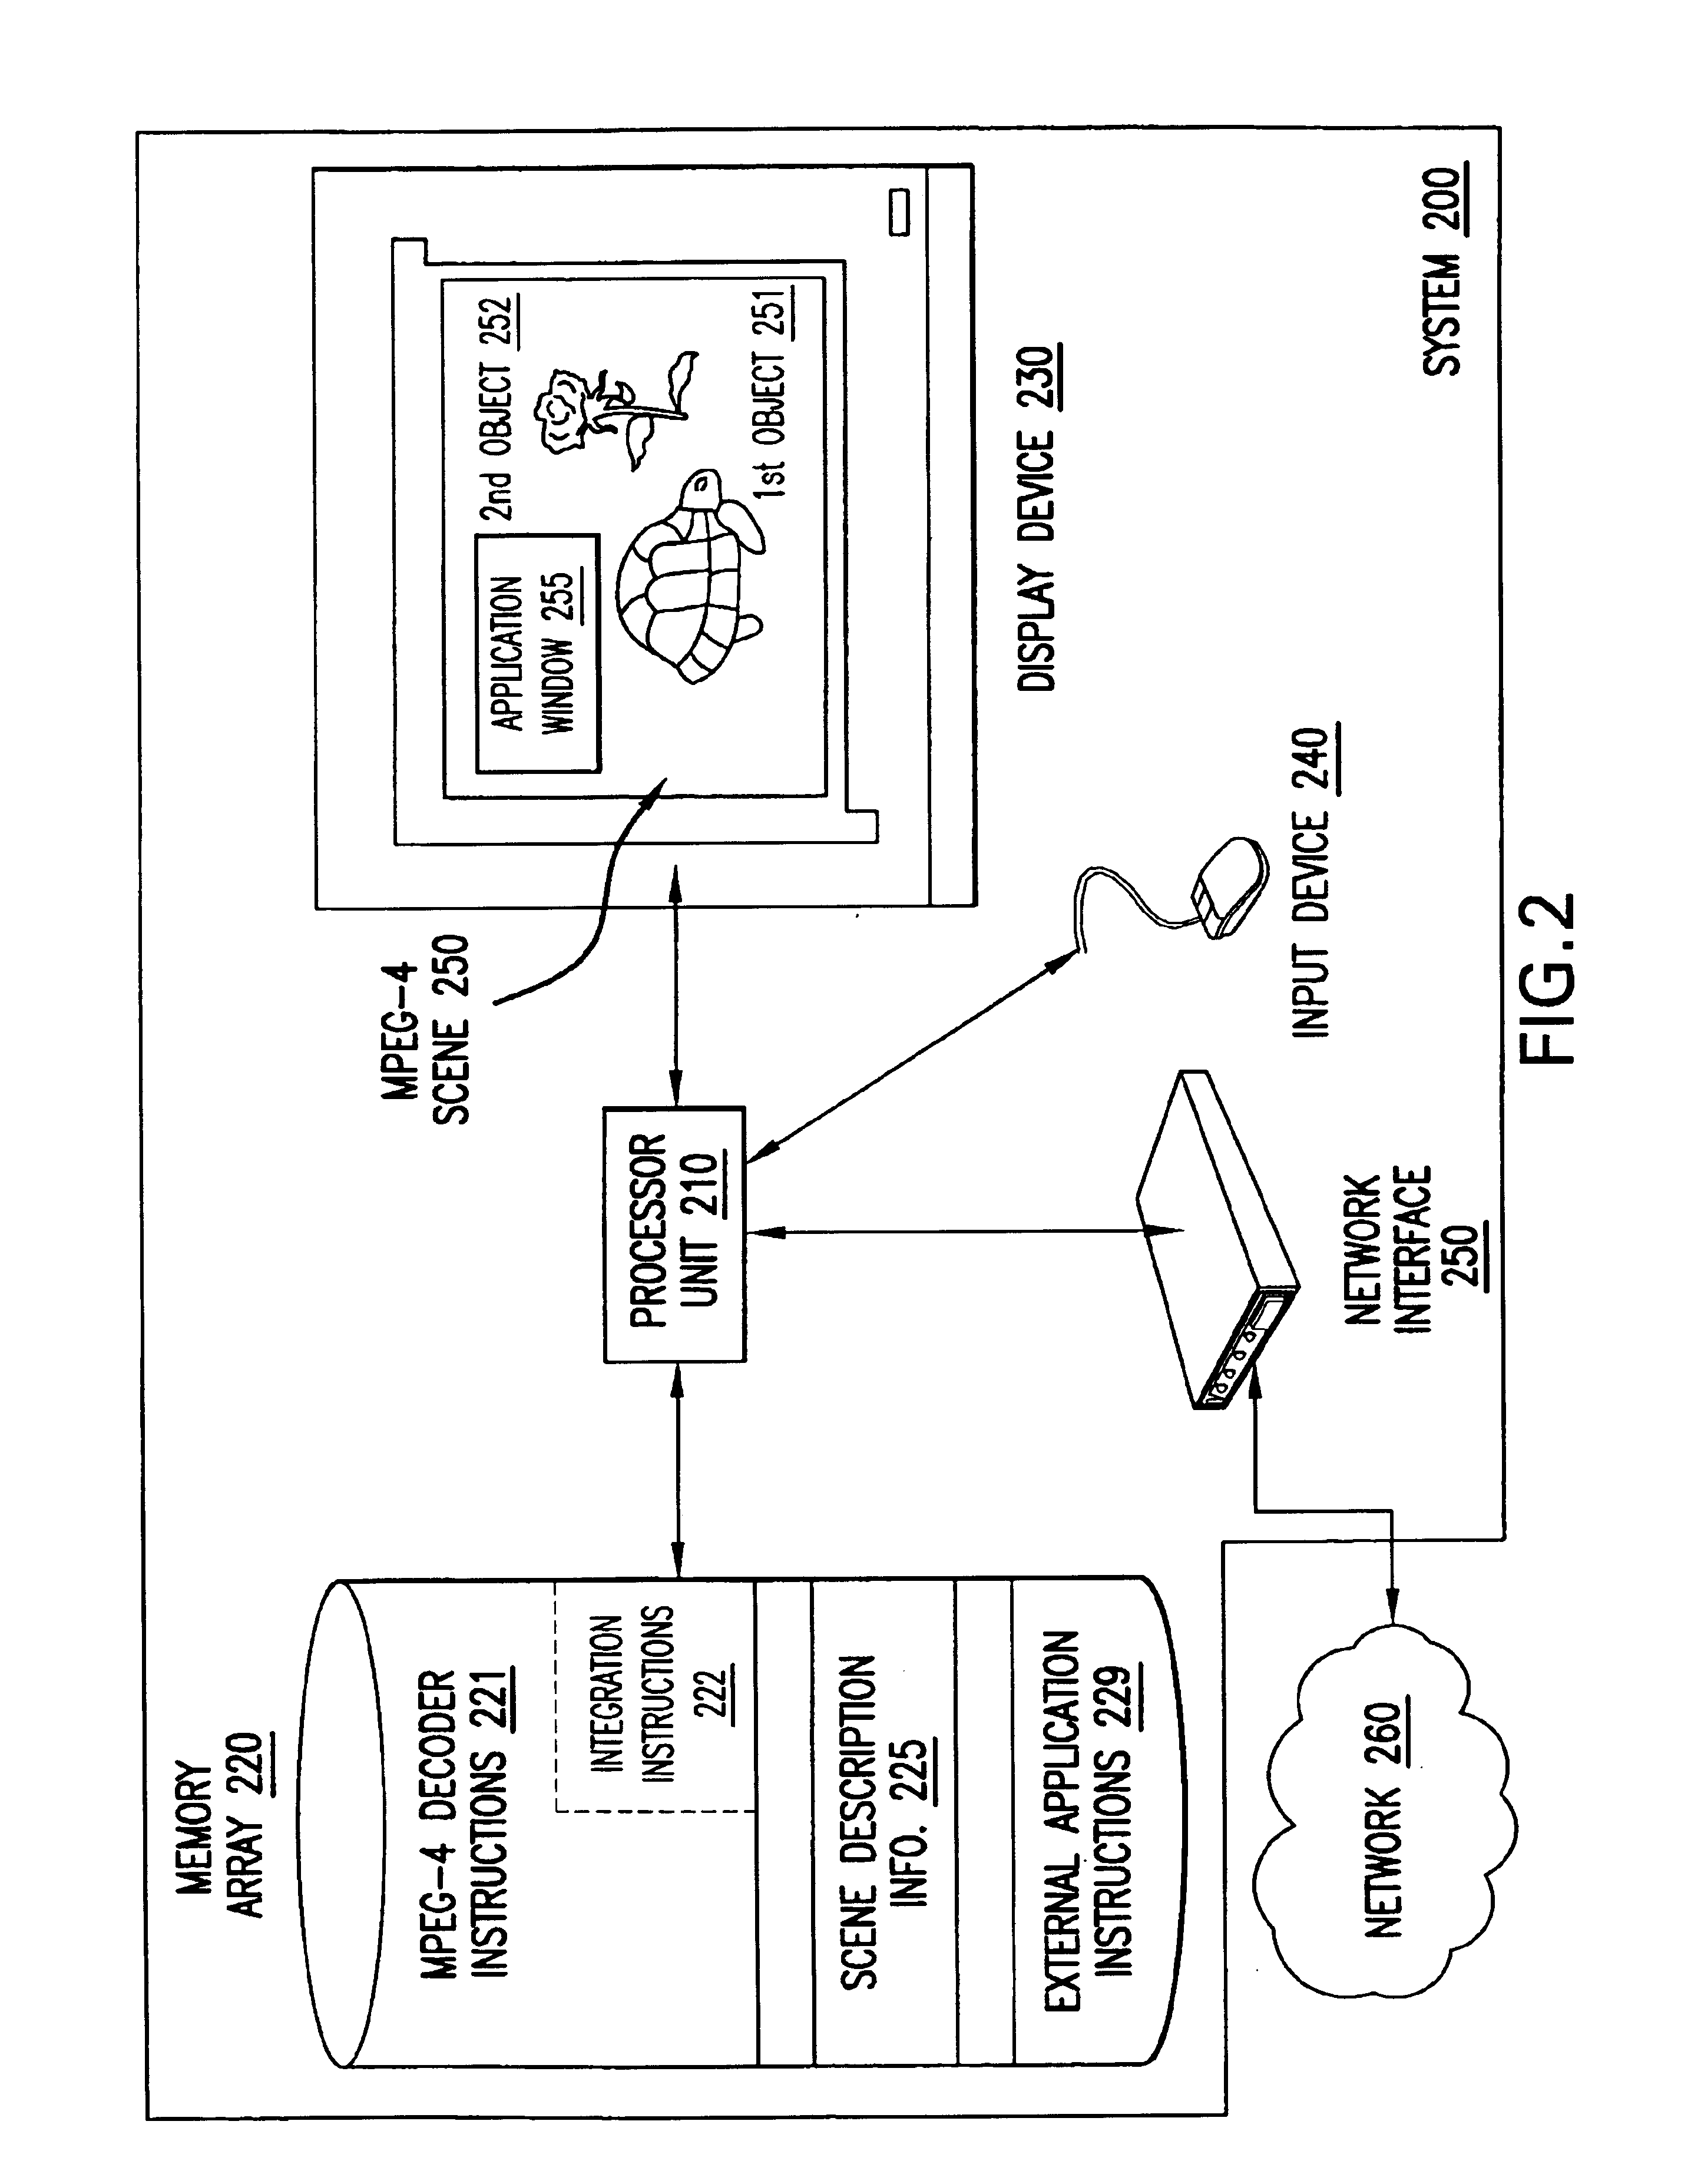 Methods and apparatus for integrating external applications into an MPEG-4 scene